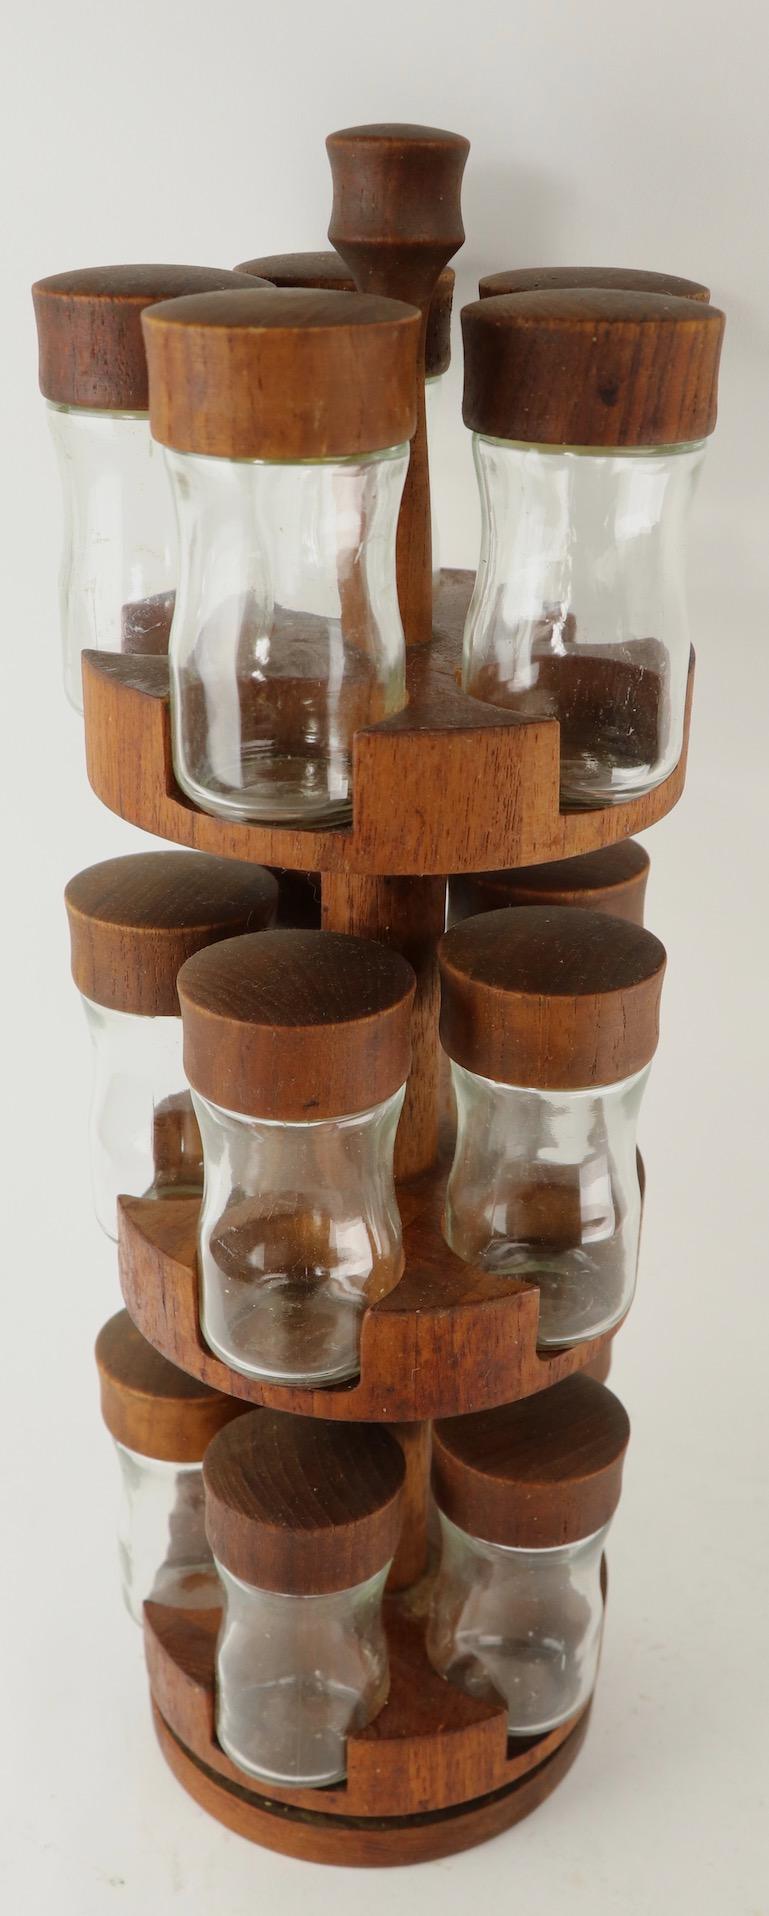 20th Century Revolving Danish Spice Rack by Digsmed